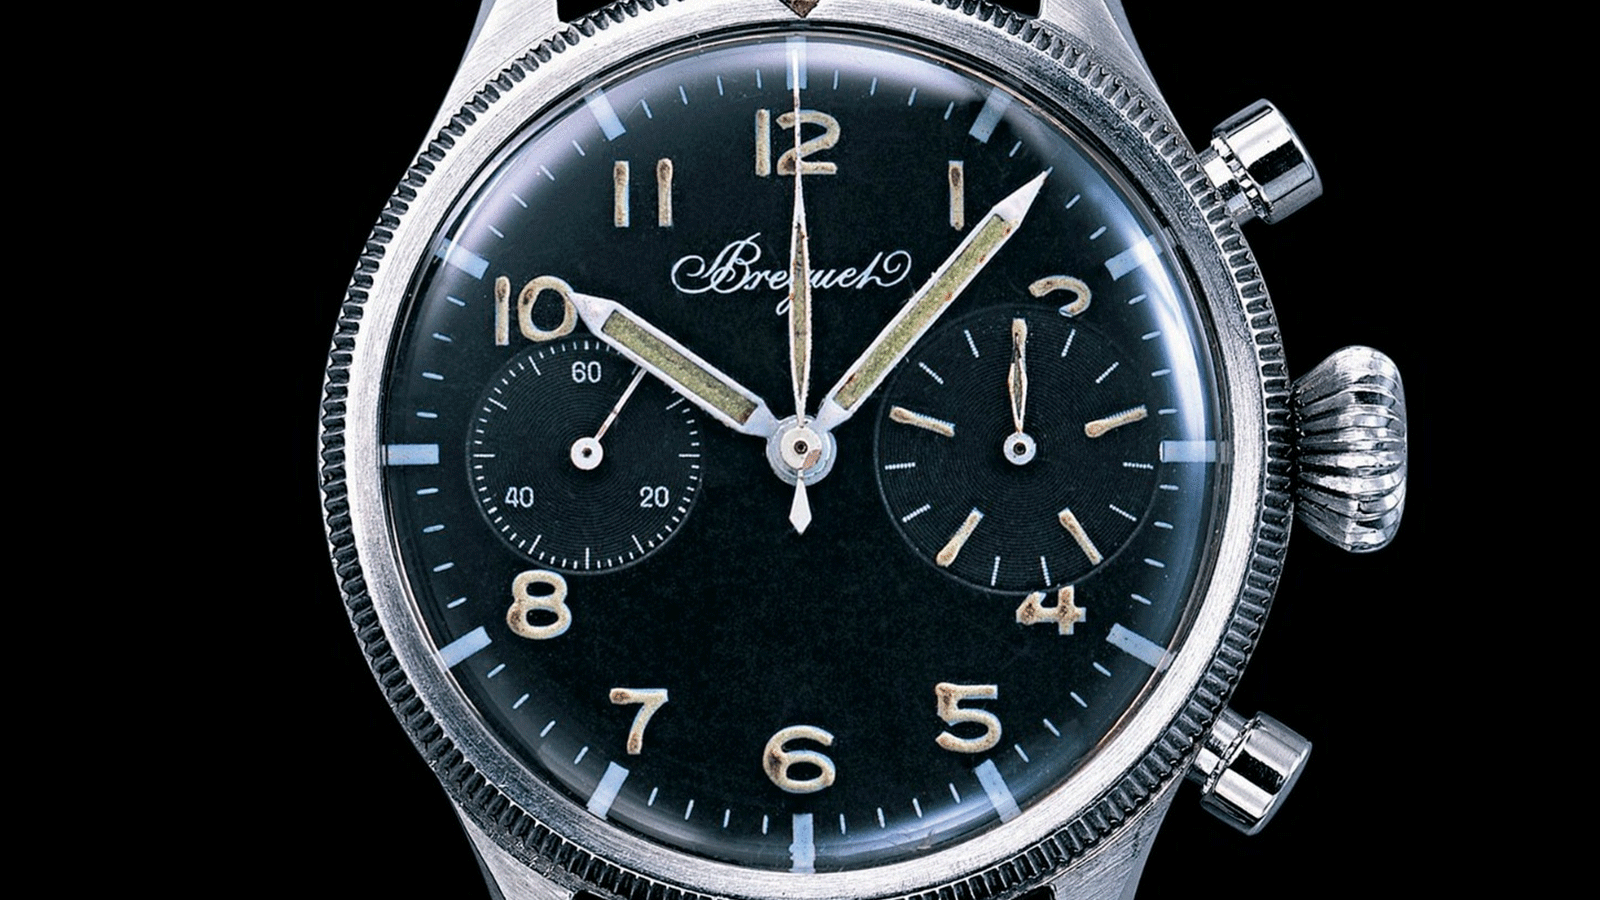 Breguet expressed its interest and designed a model that was quickly approved by the authorities. The year was 1954 and the legend of the Type 20 had just begun.